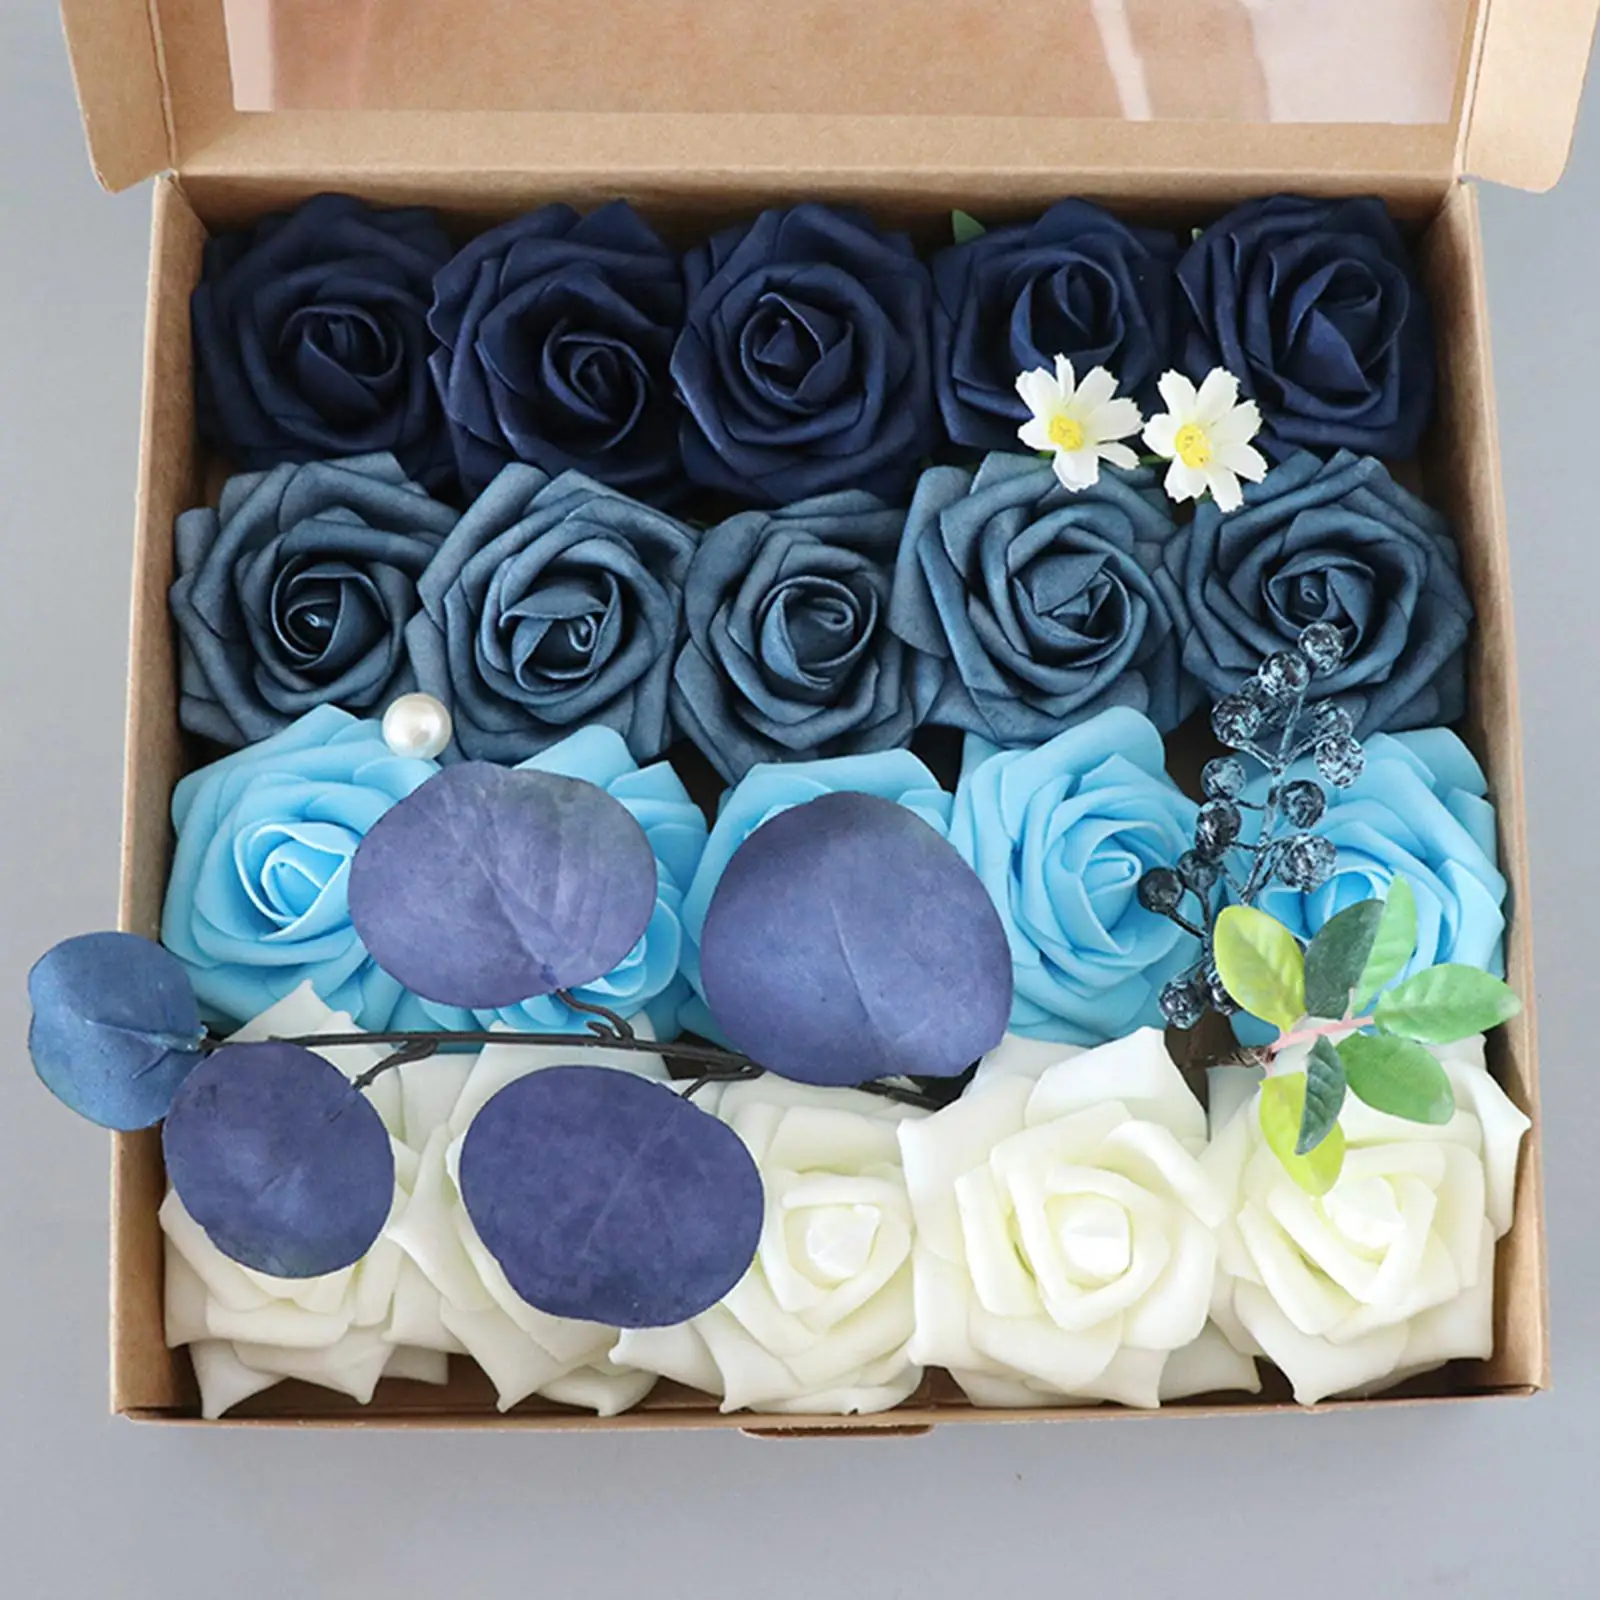 Lifelike Artificial Flowers Box Multiple Use DIY Fake Flower Silk Roses for Home Ornament Centerpieces Wedding Table Chair Decor